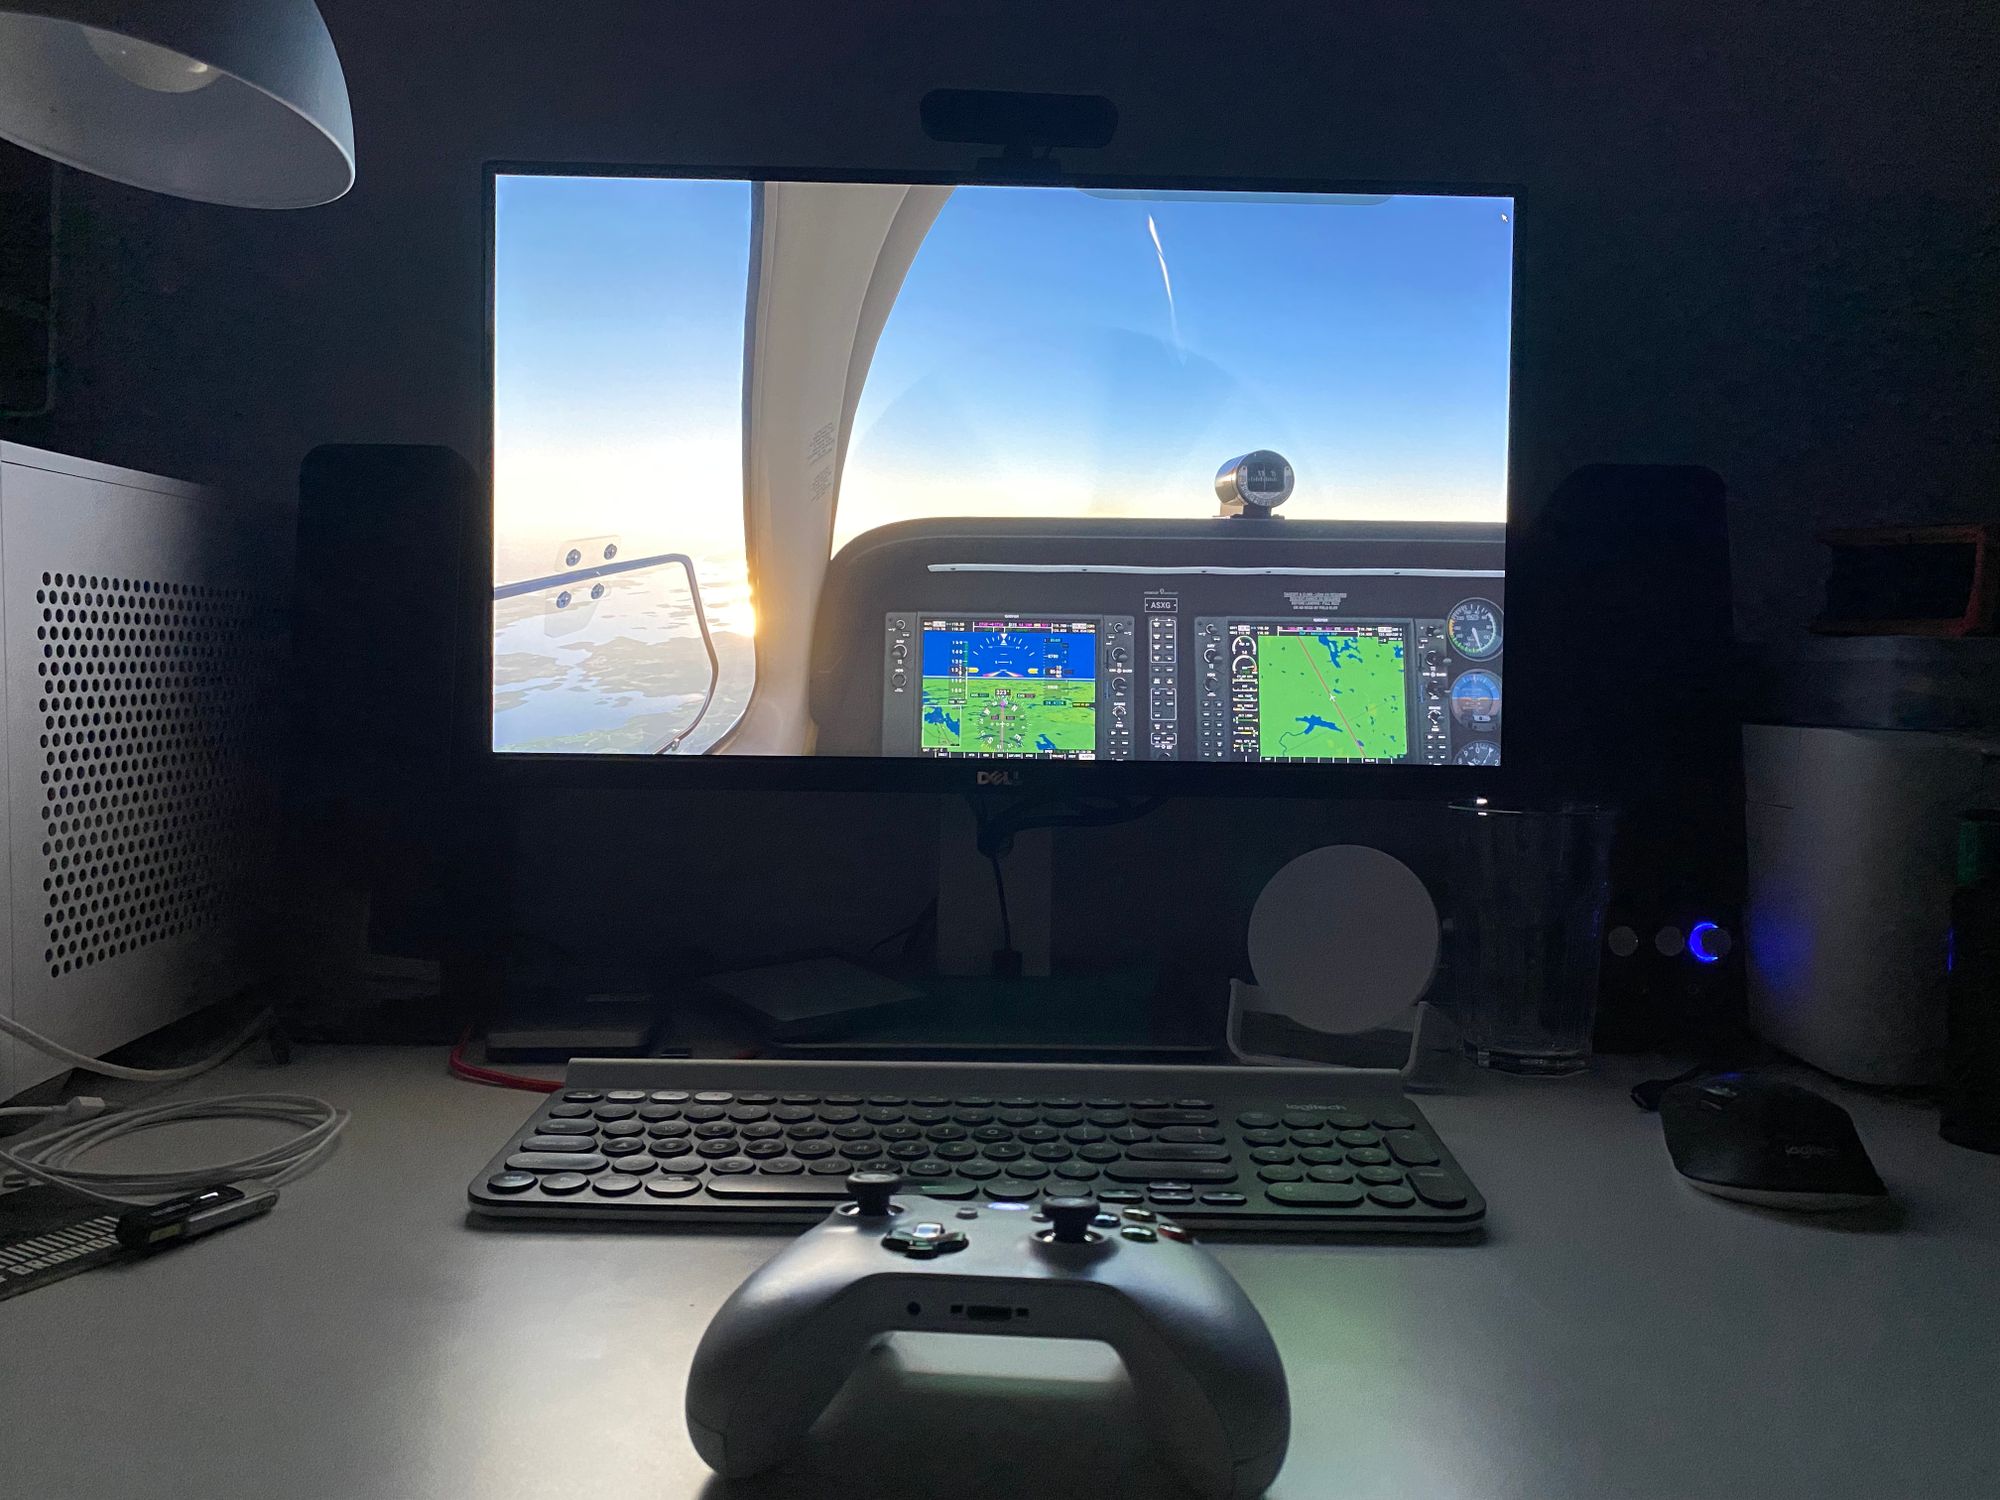 Microsoft Flight Simulator on screen, the PC on the left, and a set of peripherals (Keyboard, Mouse, Xbox Wireless controller) in the front)